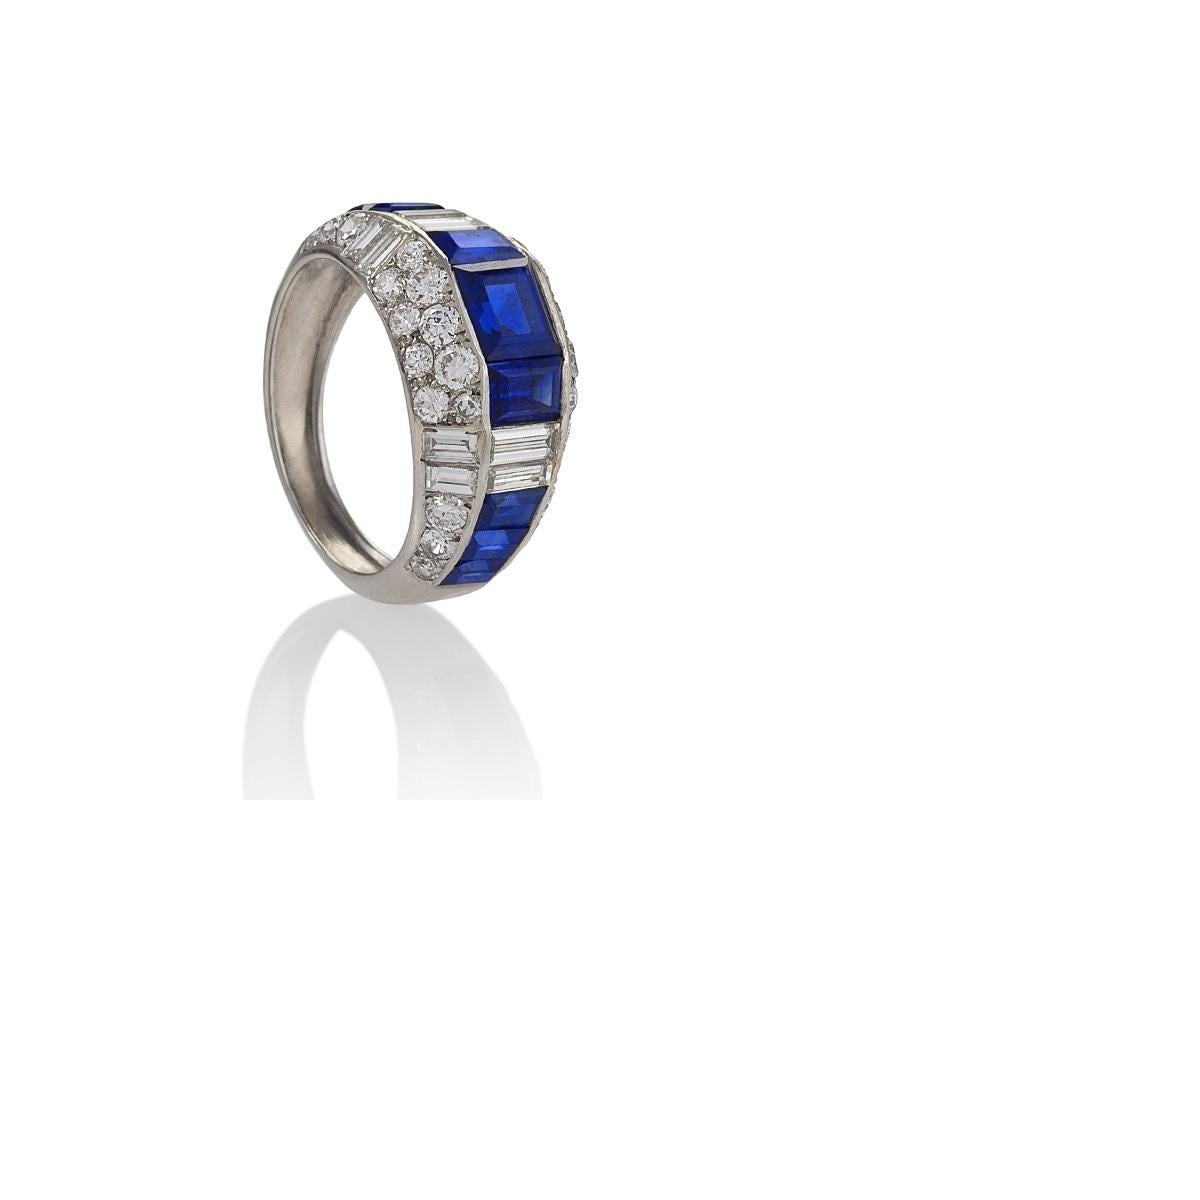 An Estate platinum ring with sapphires and diamonds. This ring centers on 9 rectangular-cut blue sapphires with an approximate total weight of 2.40 carats, 42 baguette and round brilliant cut diamonds with an approximate total weight of 3.00 carats